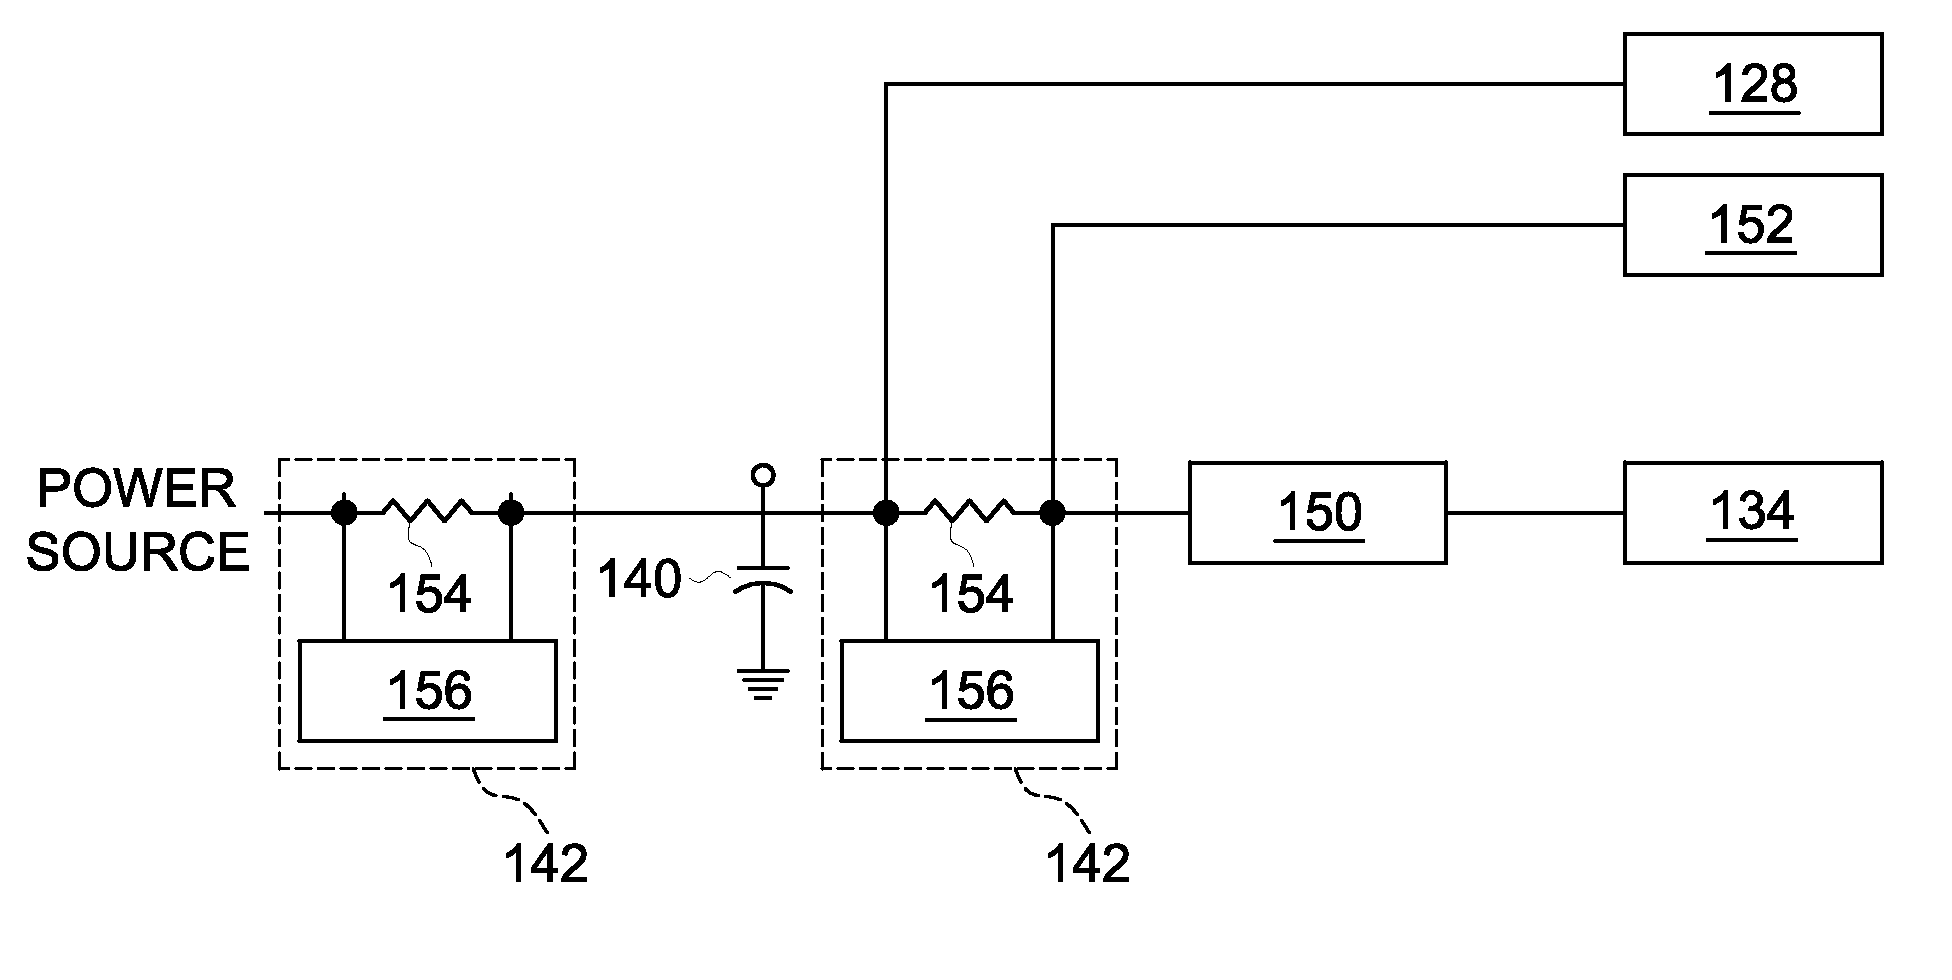 Capacitance check and current monitoring circuit for use with a circuit protection device